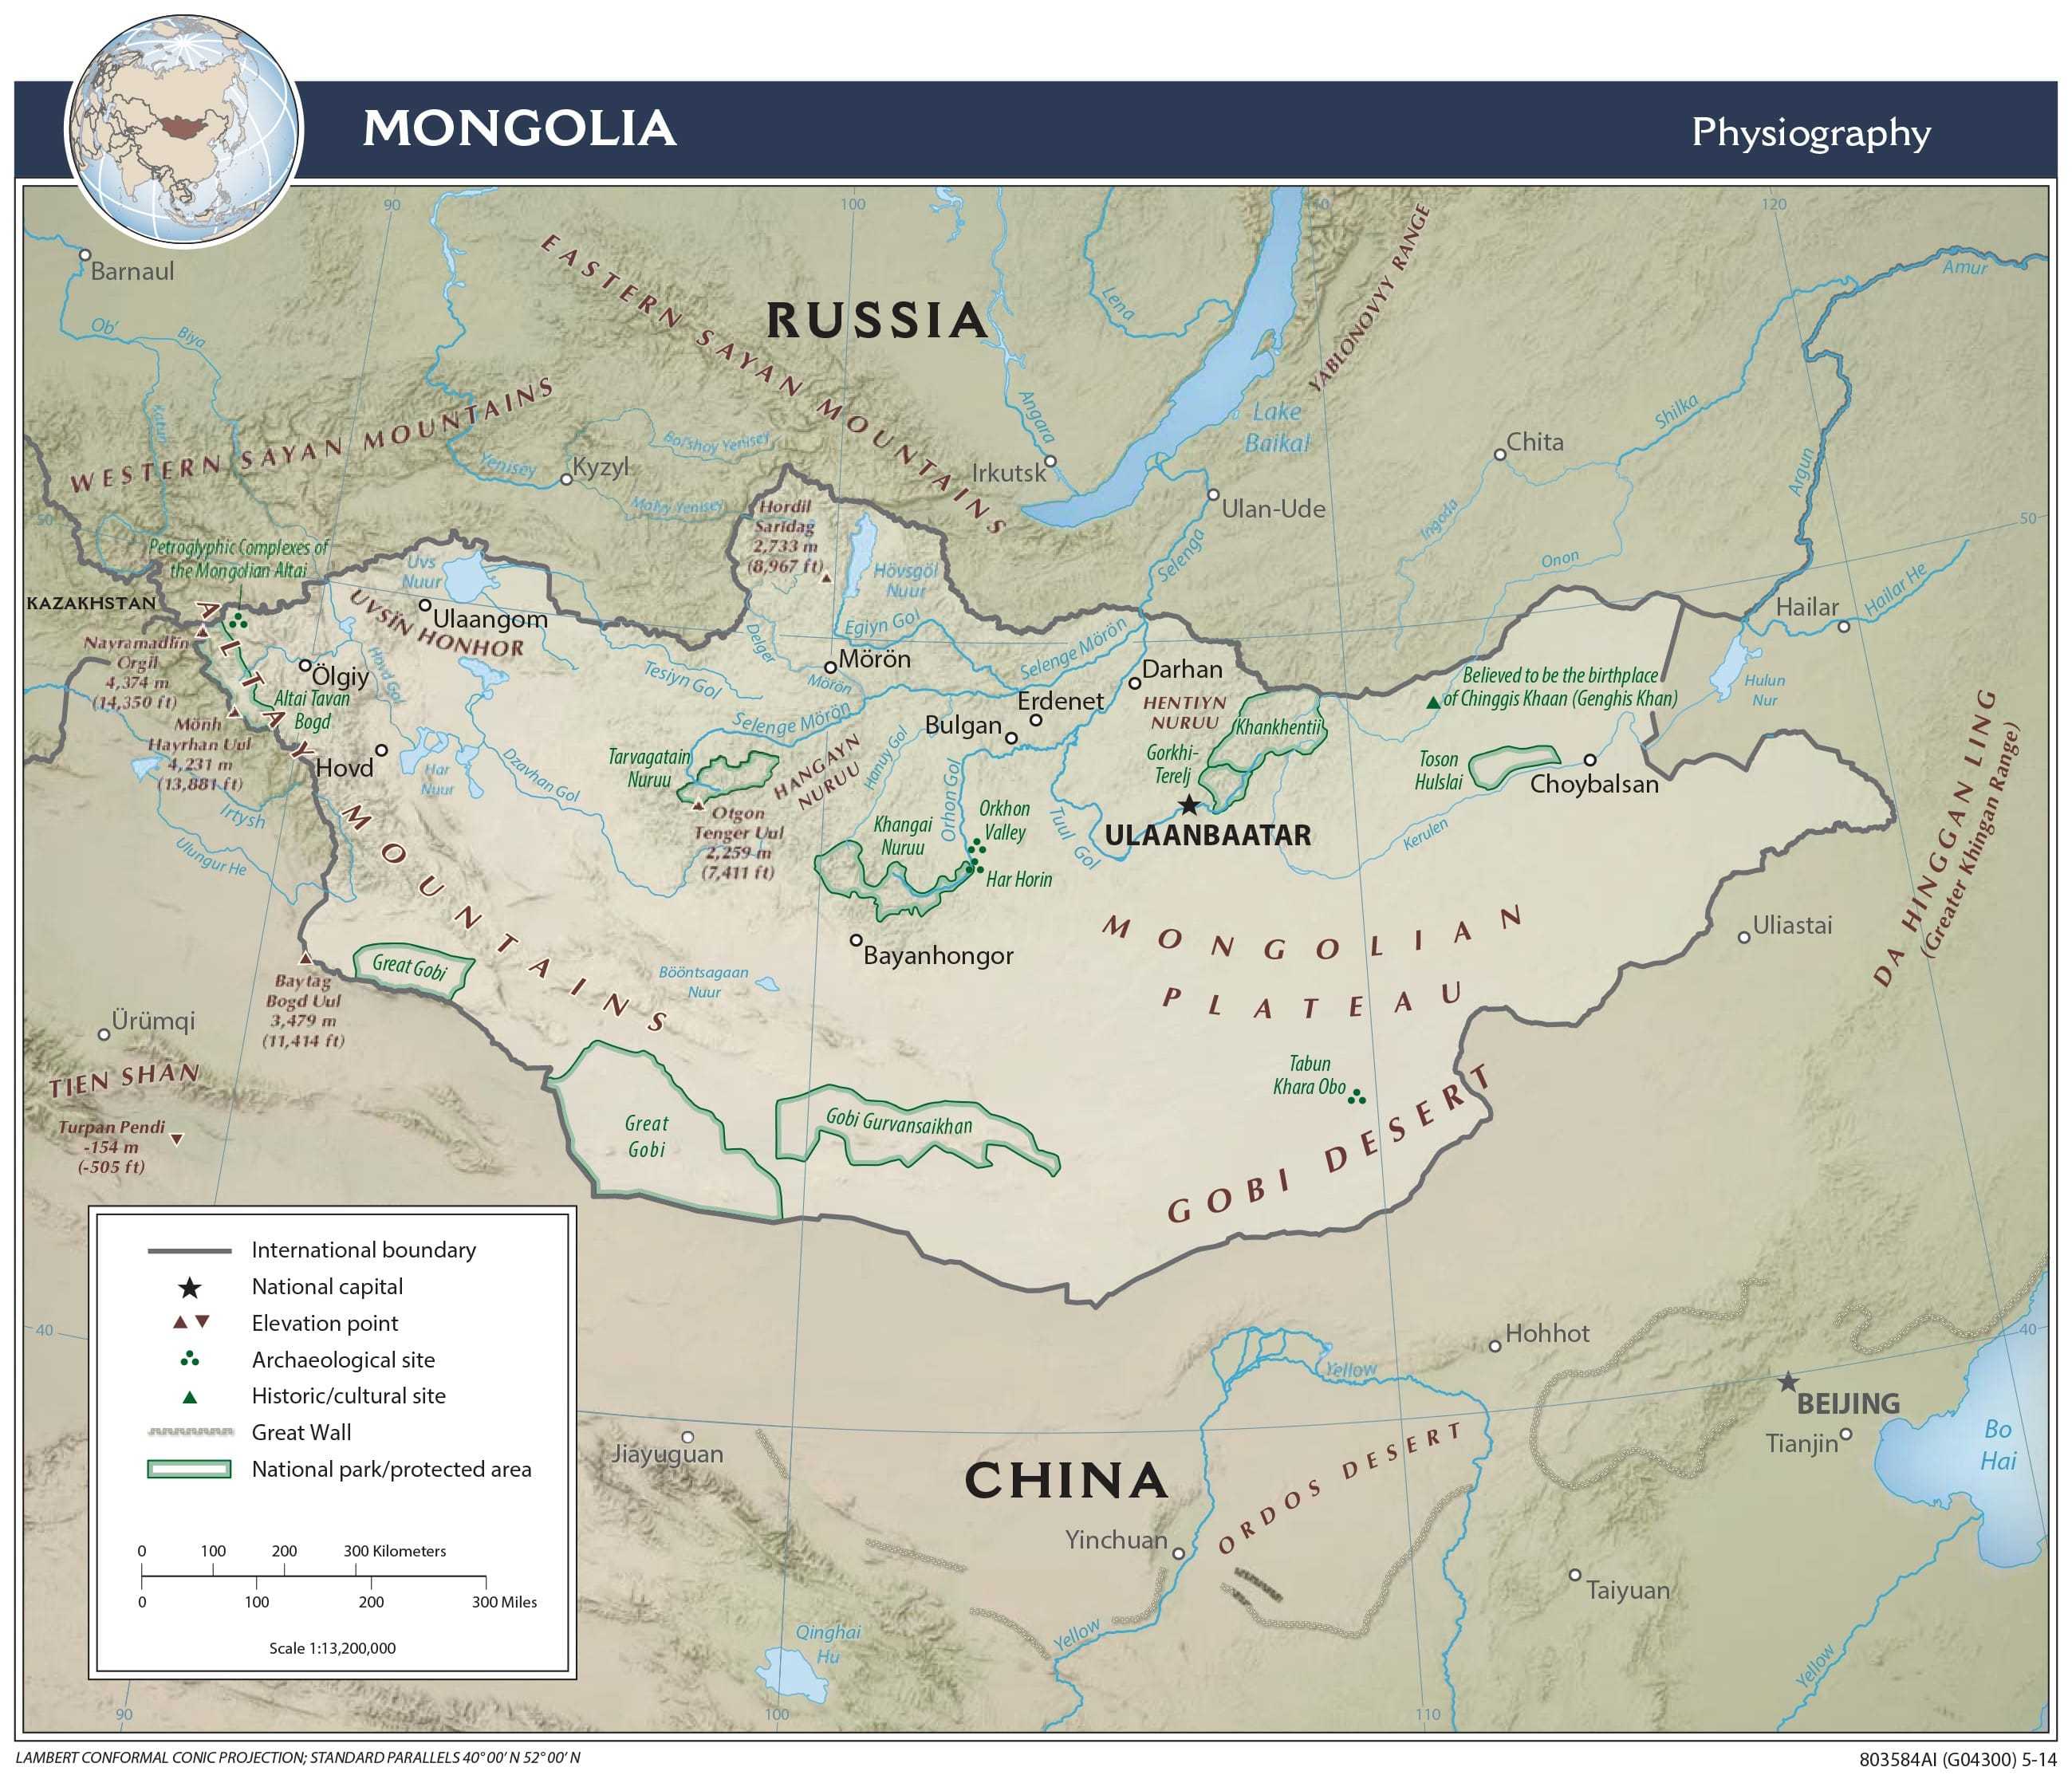 Physiographical map of Mongolia.